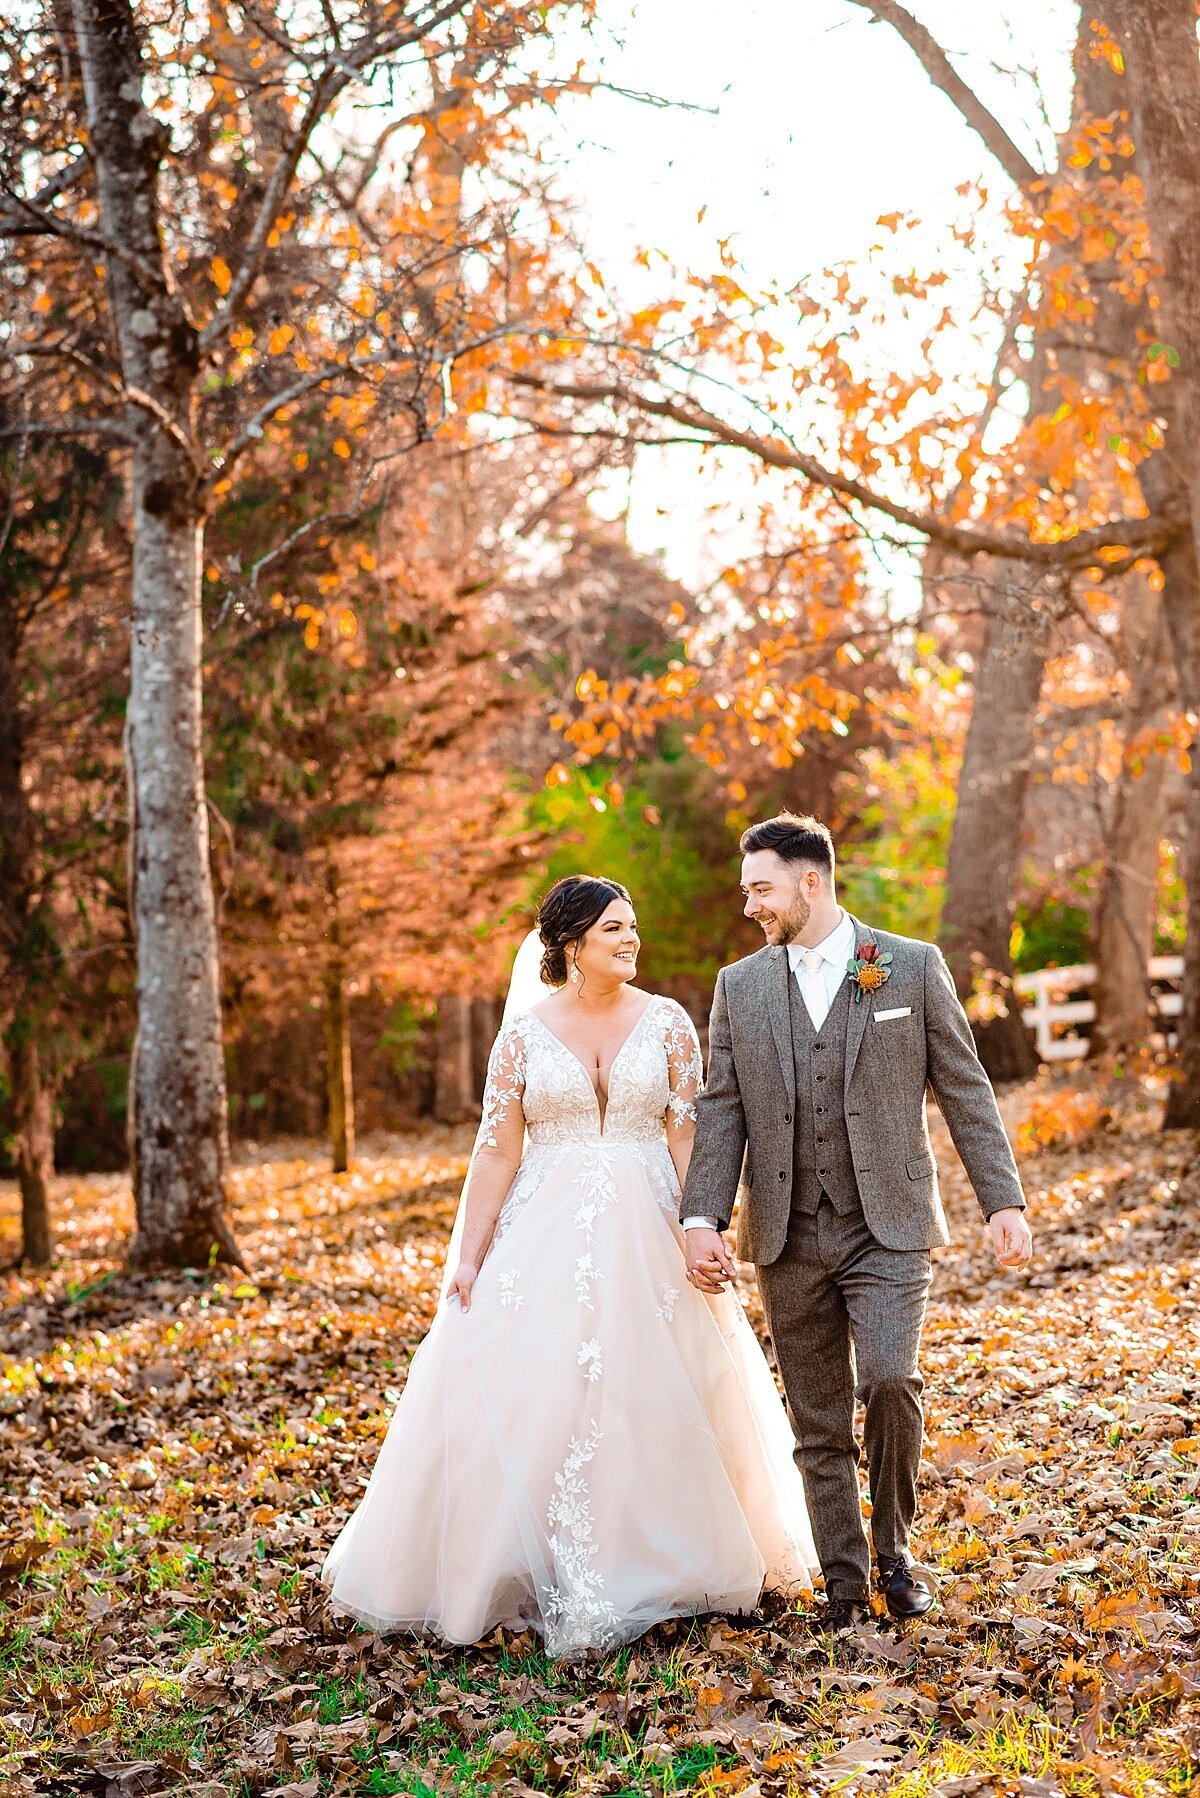 Bride wearing long sleeve lace wedding dress walking hand in hand with groom who is wearing a grey tweed suit strolling through leaves outside of Copper Ridge event center